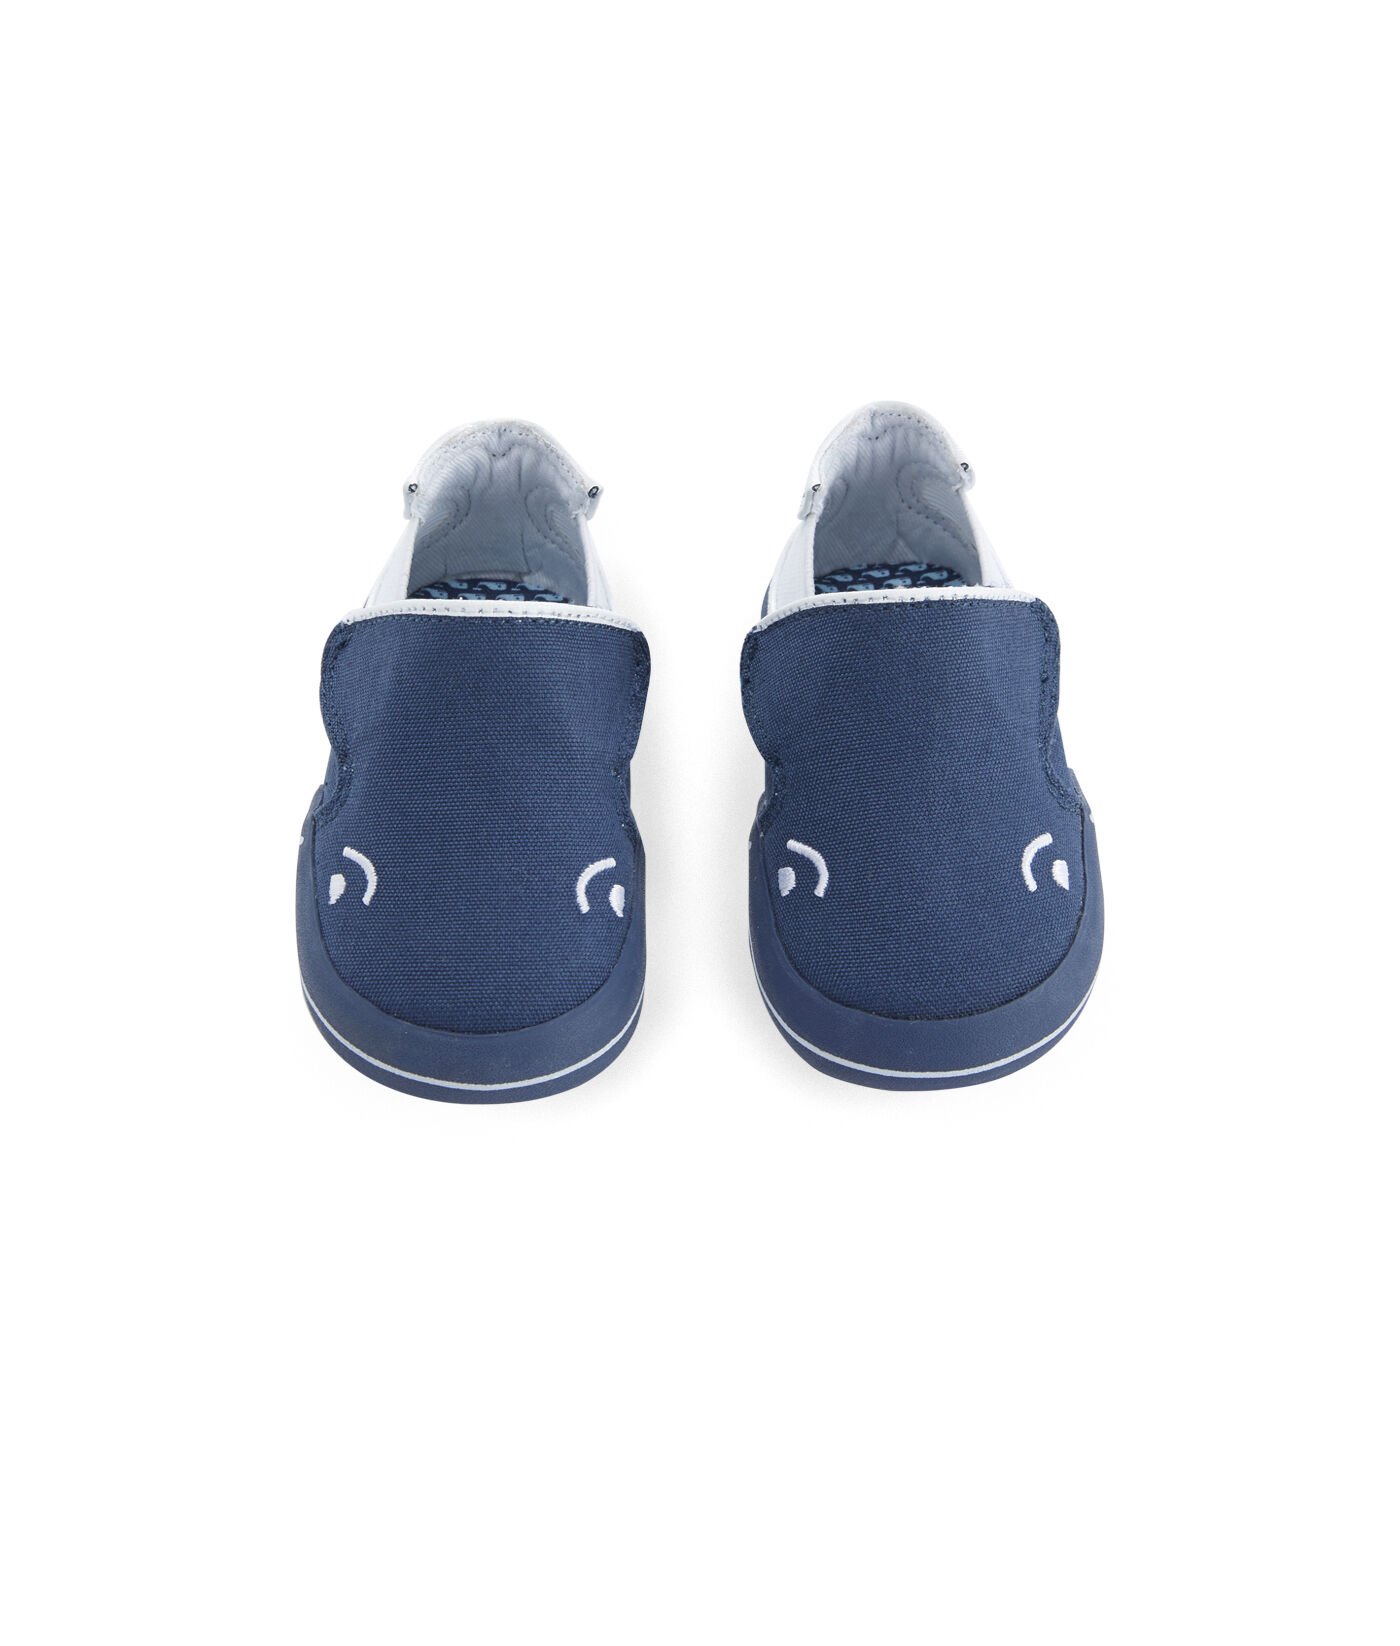 infant sperry boots